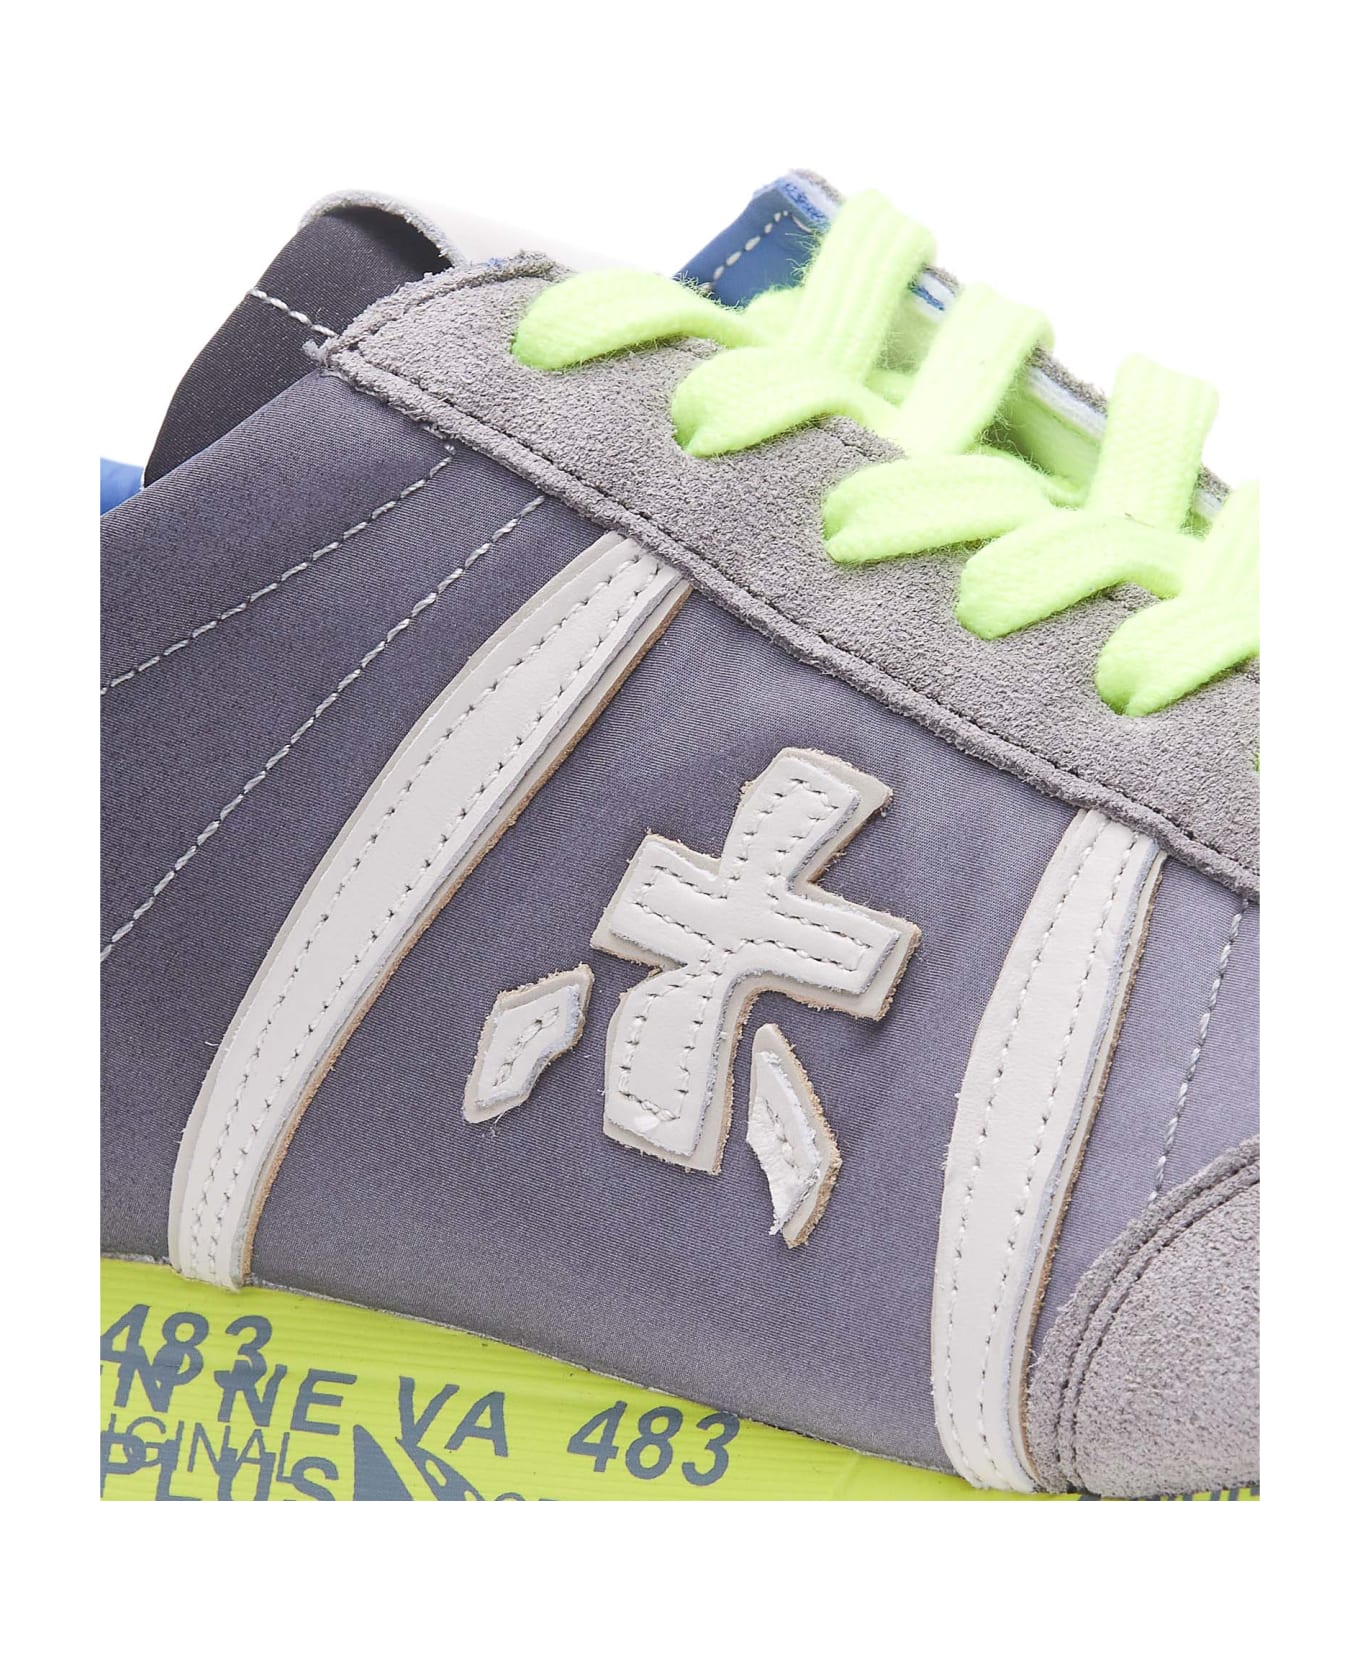 Premiata Lucy Sneakers - Grey スニーカー